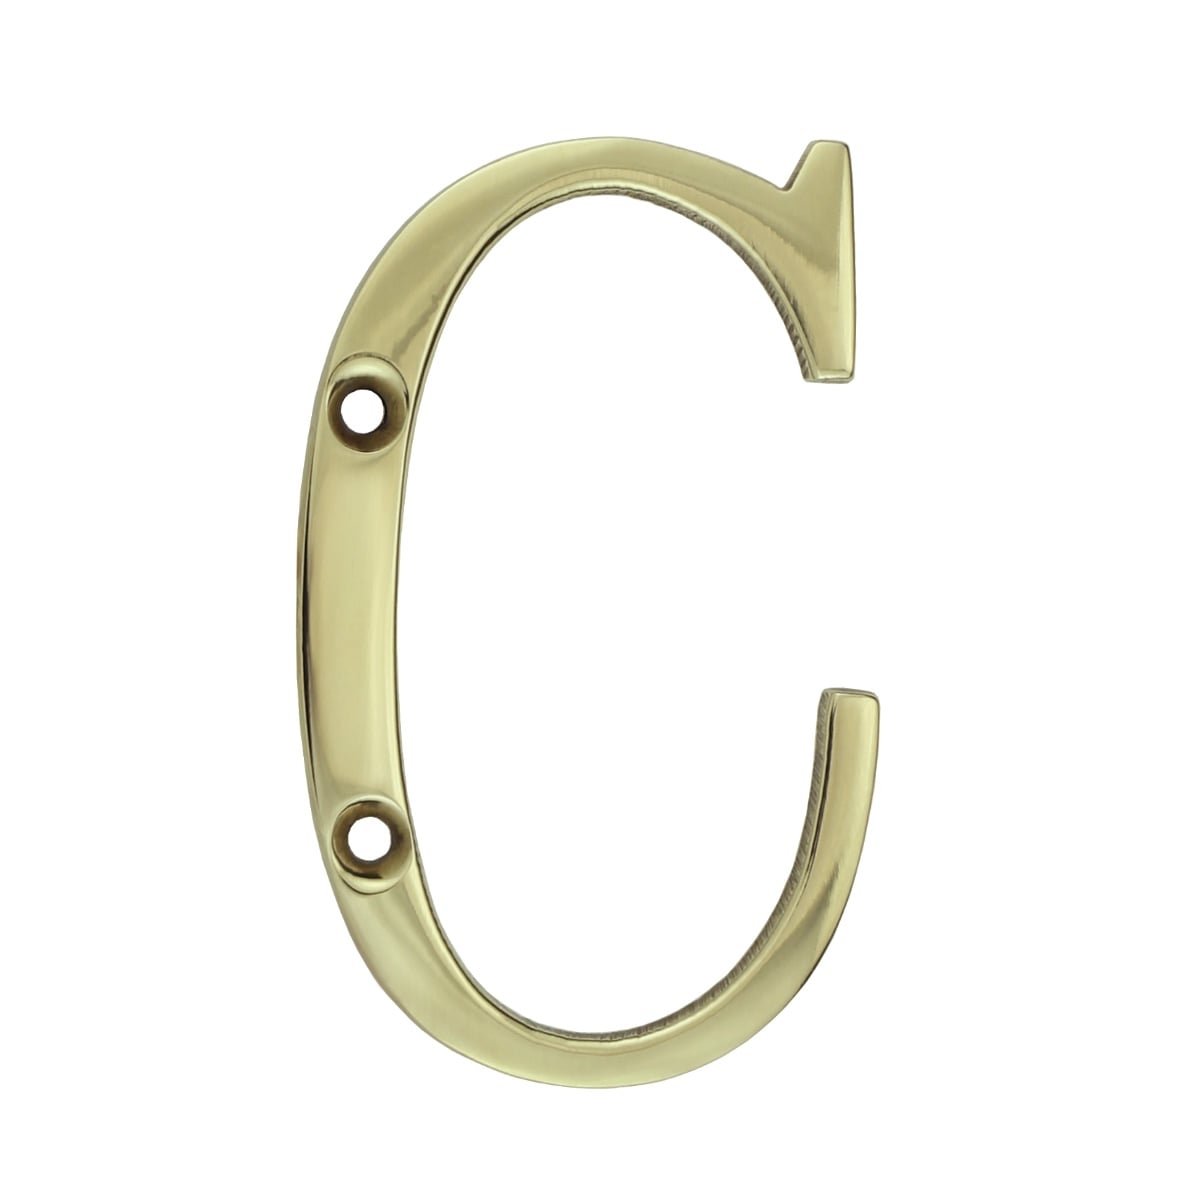 Wall letter C shiny brass - 77 mm